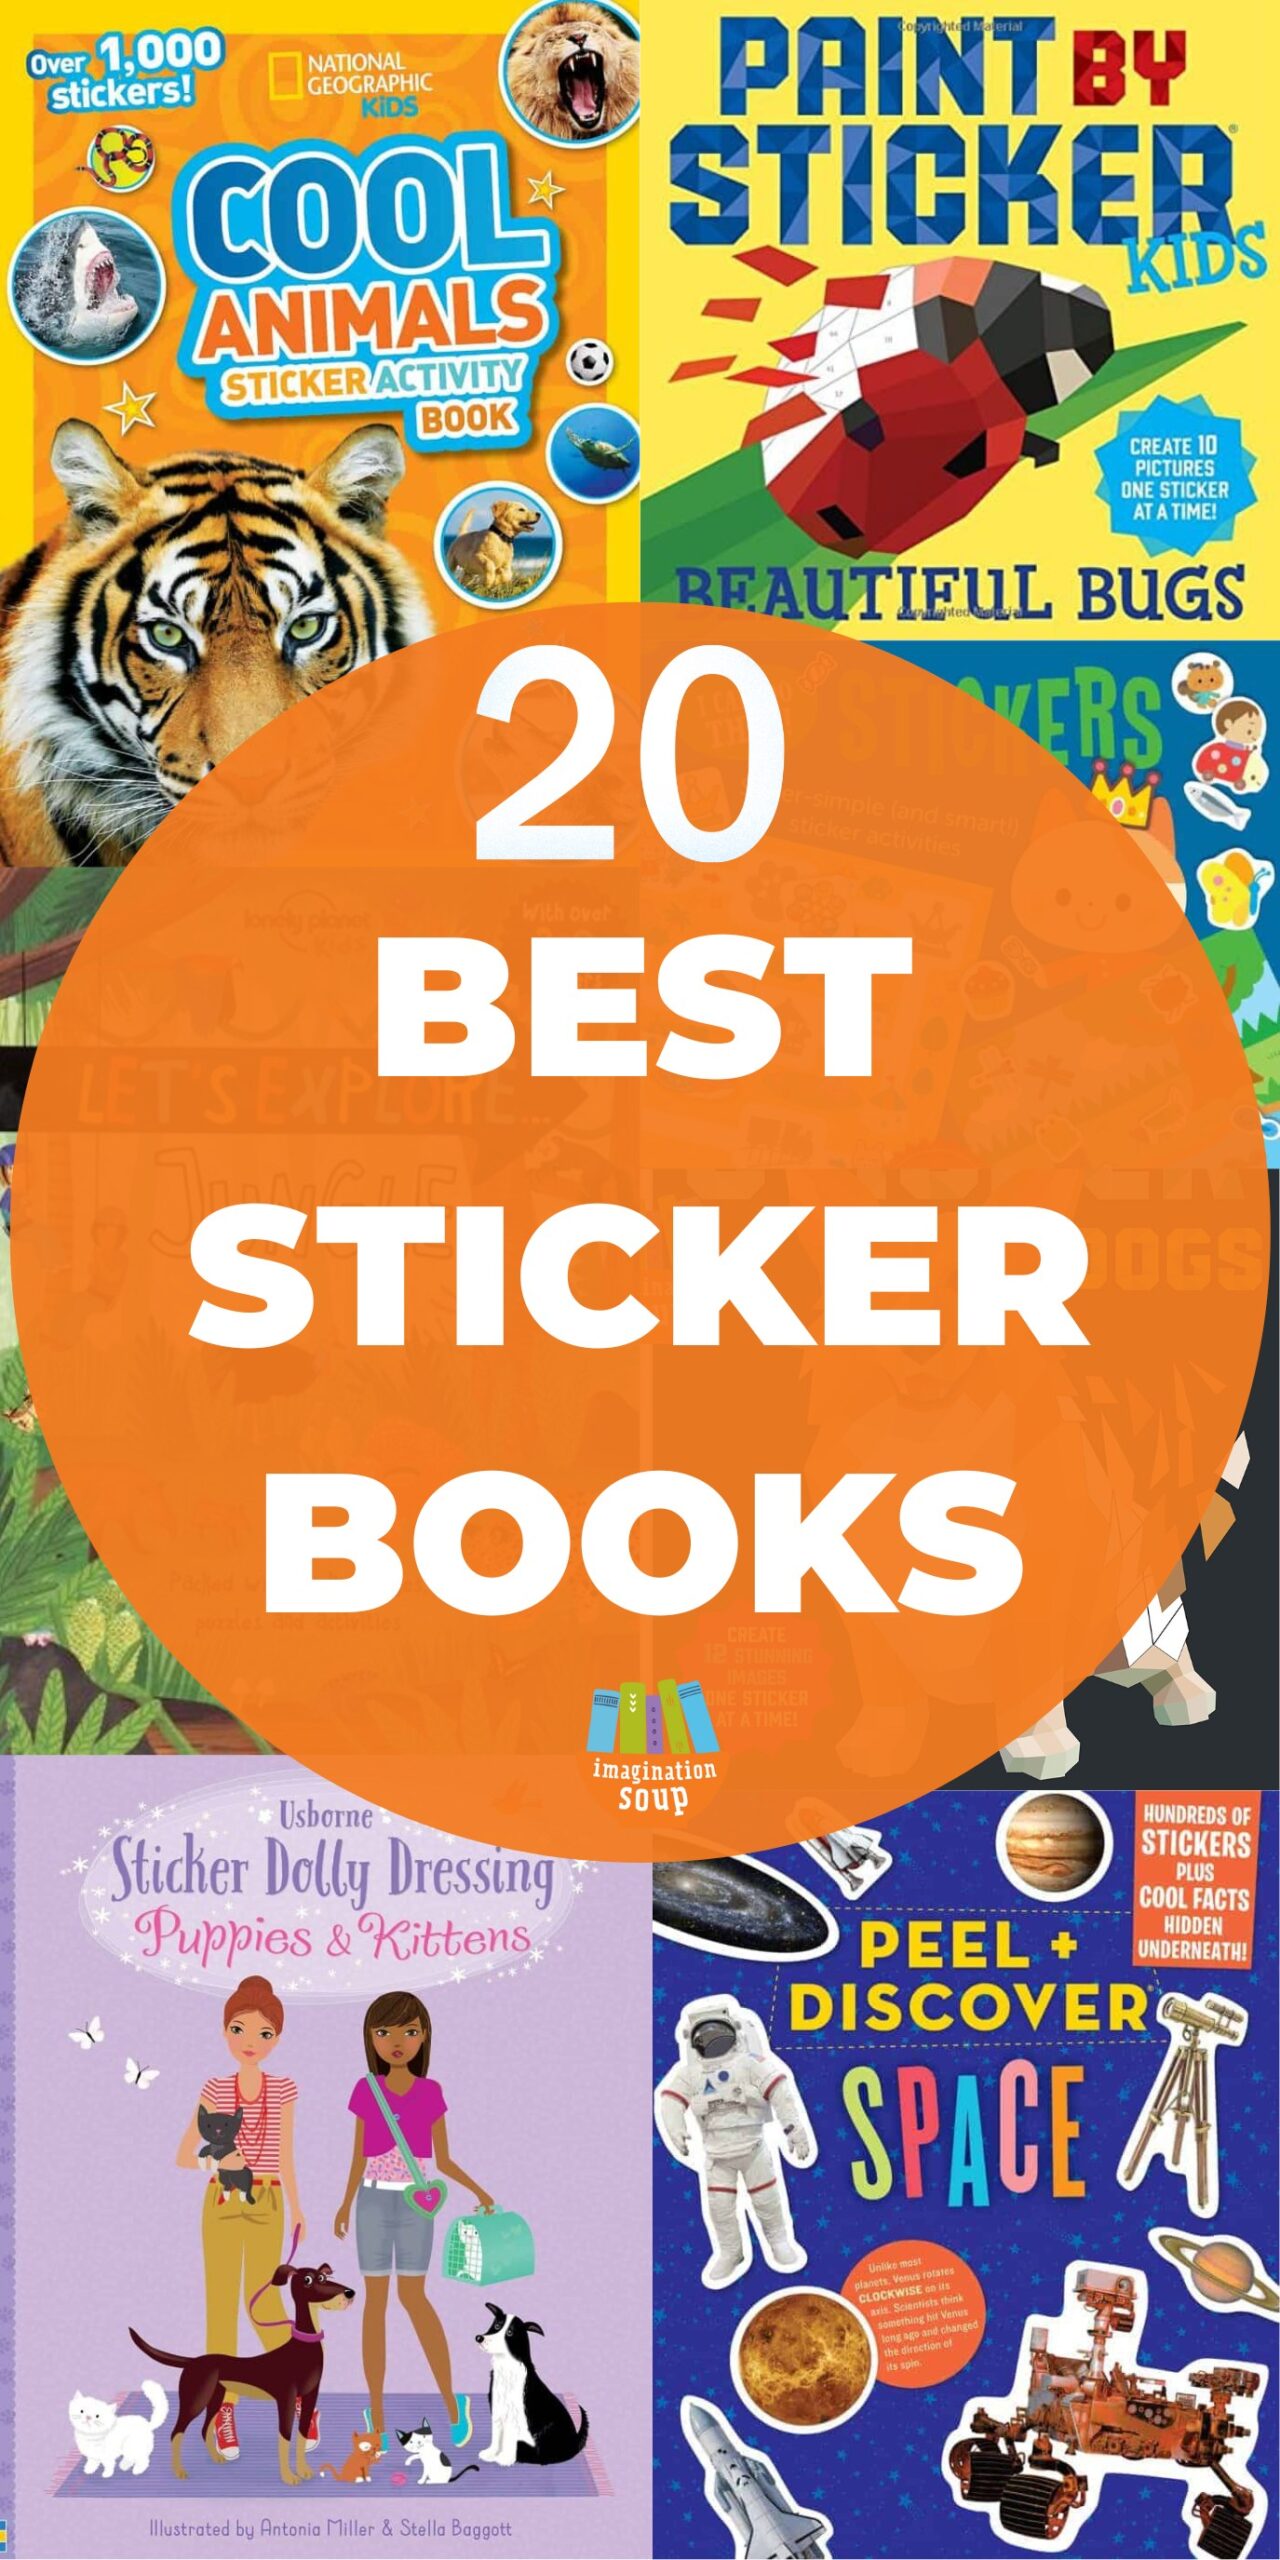 Are you looking for a good sticker book to keep your children entertained? What about sticker books for preschoolers and elementary schoolers that also build fine-motor skills and visual discrimination AND offer learning opportunities?